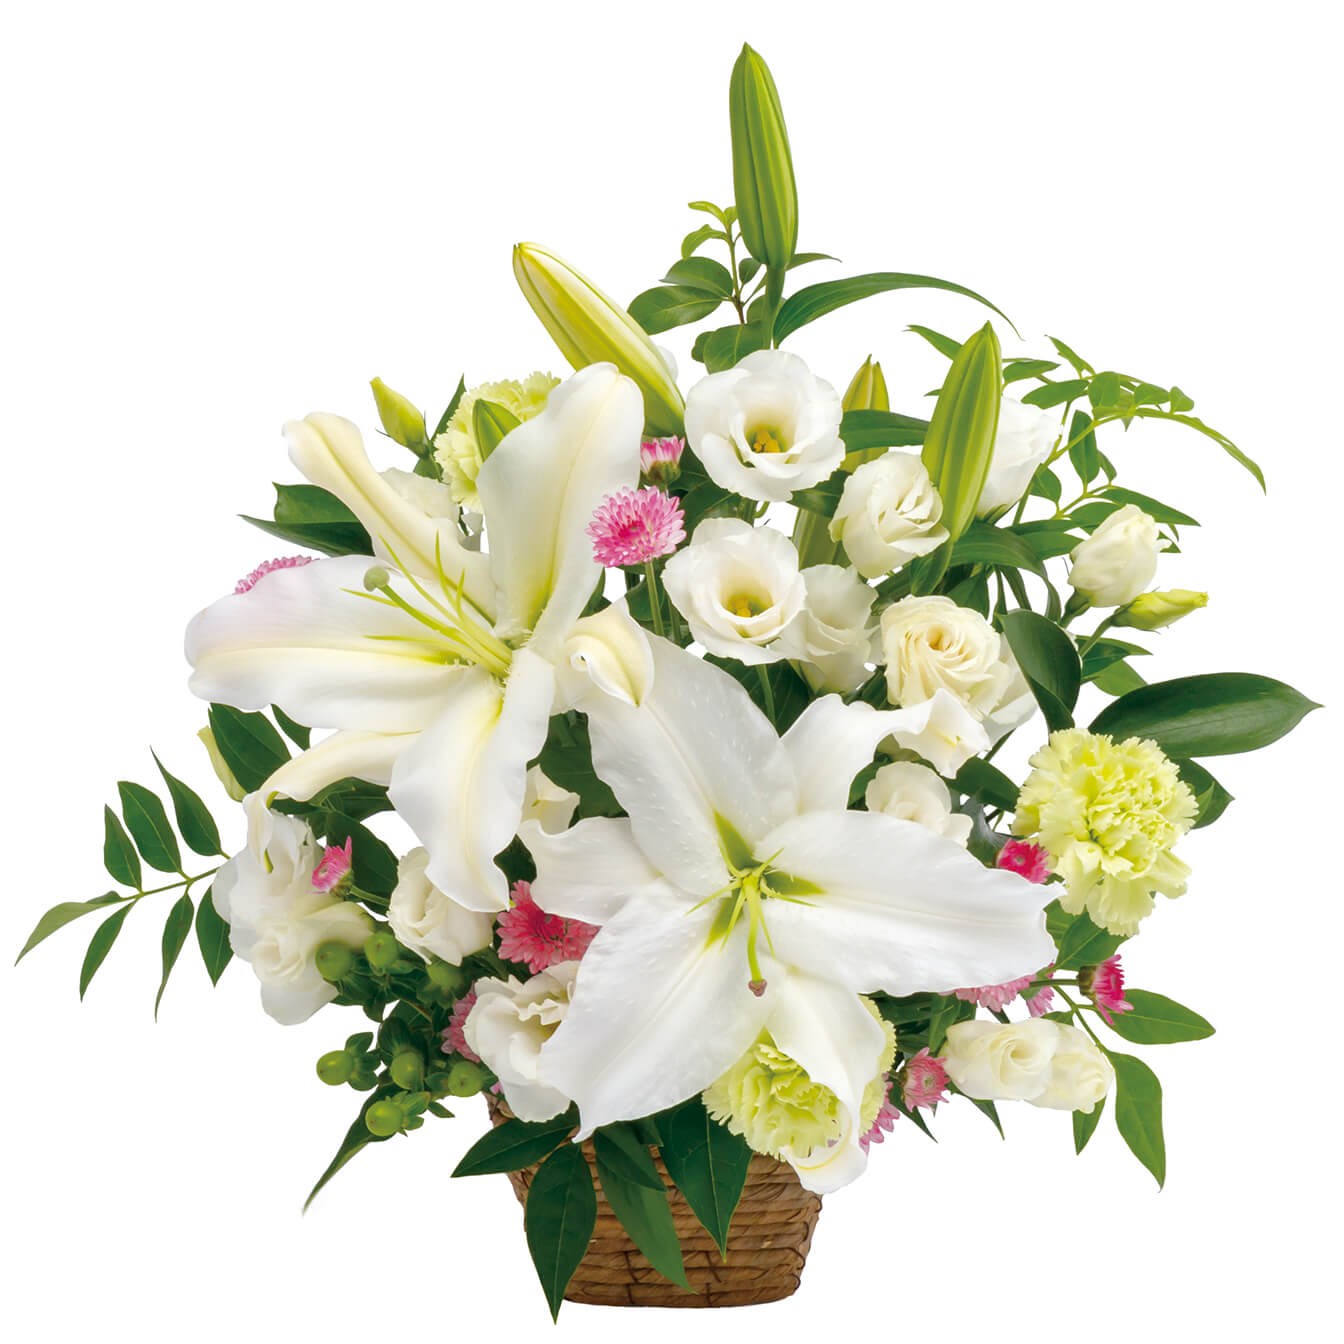 Sympathy arrangement in white with some pastel colors